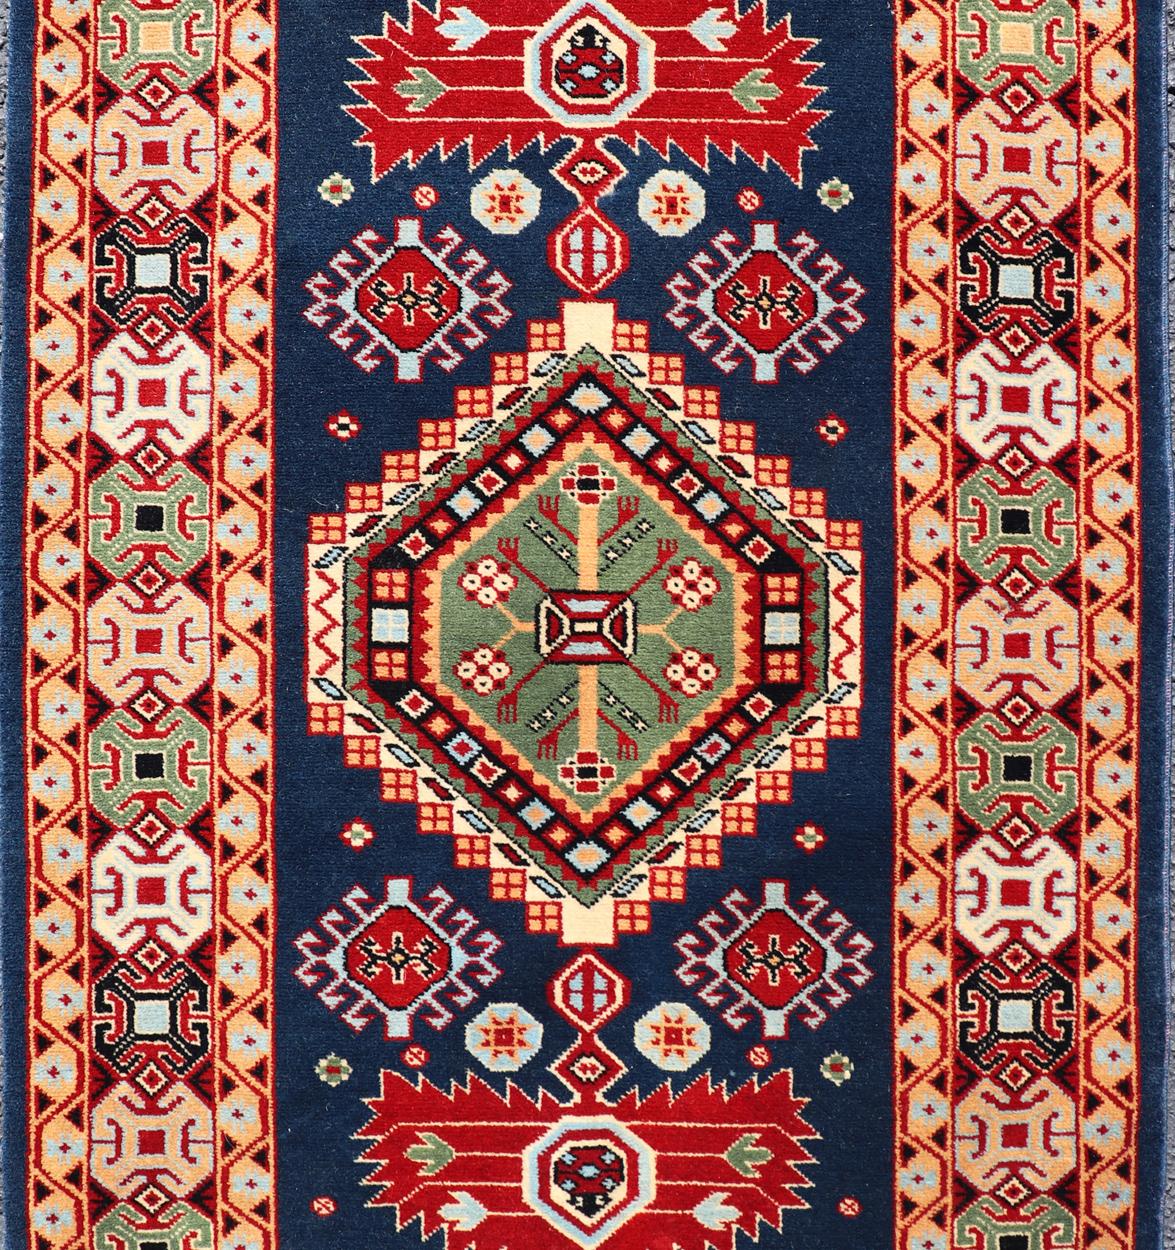 Tribal geometric medallion design vintage rug from Caucasus in multi-colors, rug 10-KE-311, country of origin / type: Caucasus / Tribal, late 20th century

The vibrant reds, blues, and ivories that decorate this beautiful carpet from the late 20th